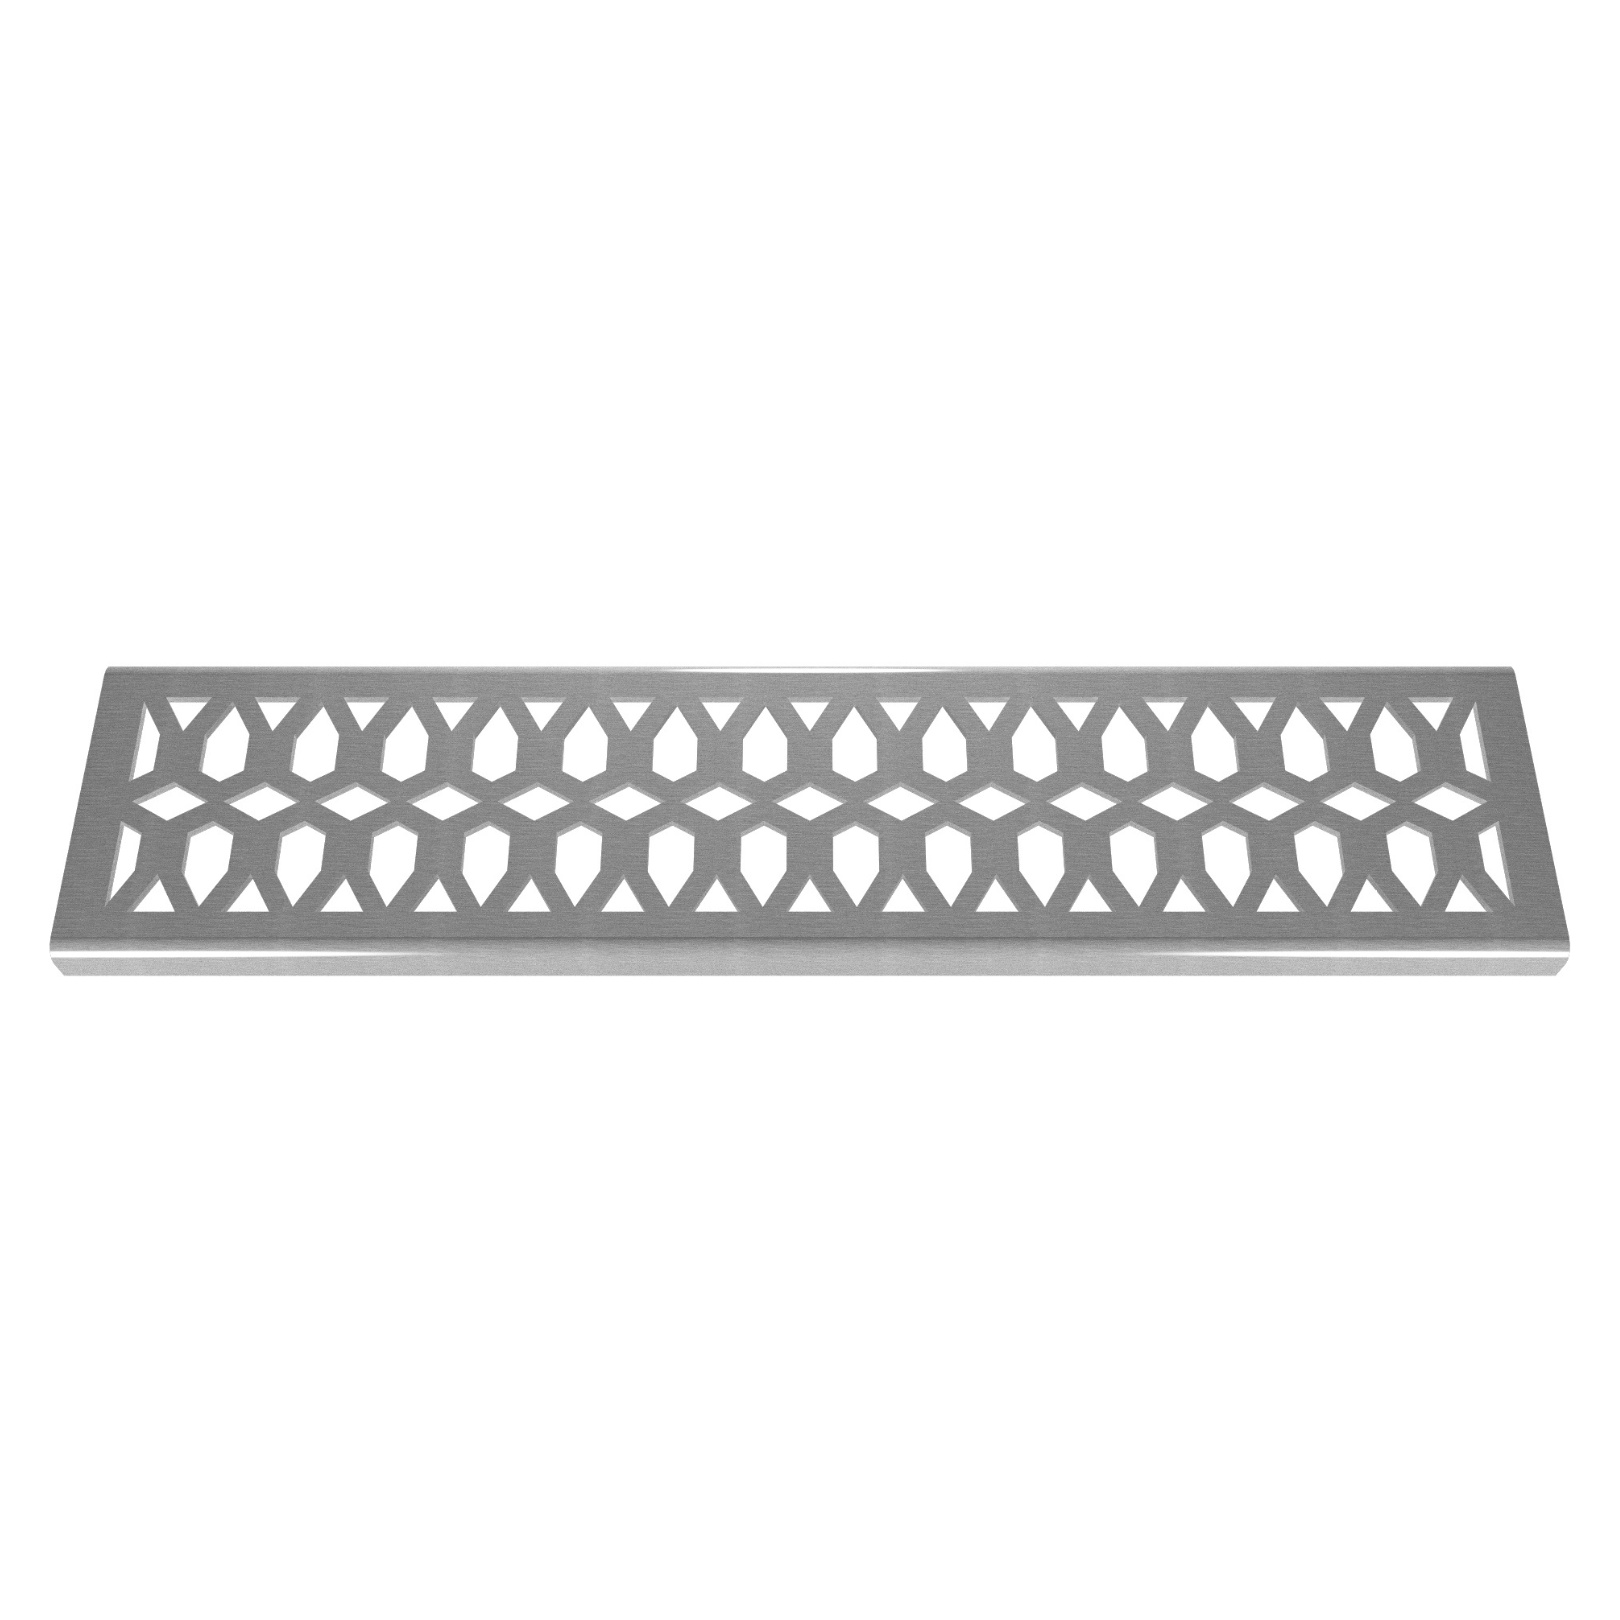 Diamond Stainless Steel 304 Channel Drain Grate 69 x 913mm (3 Inch)